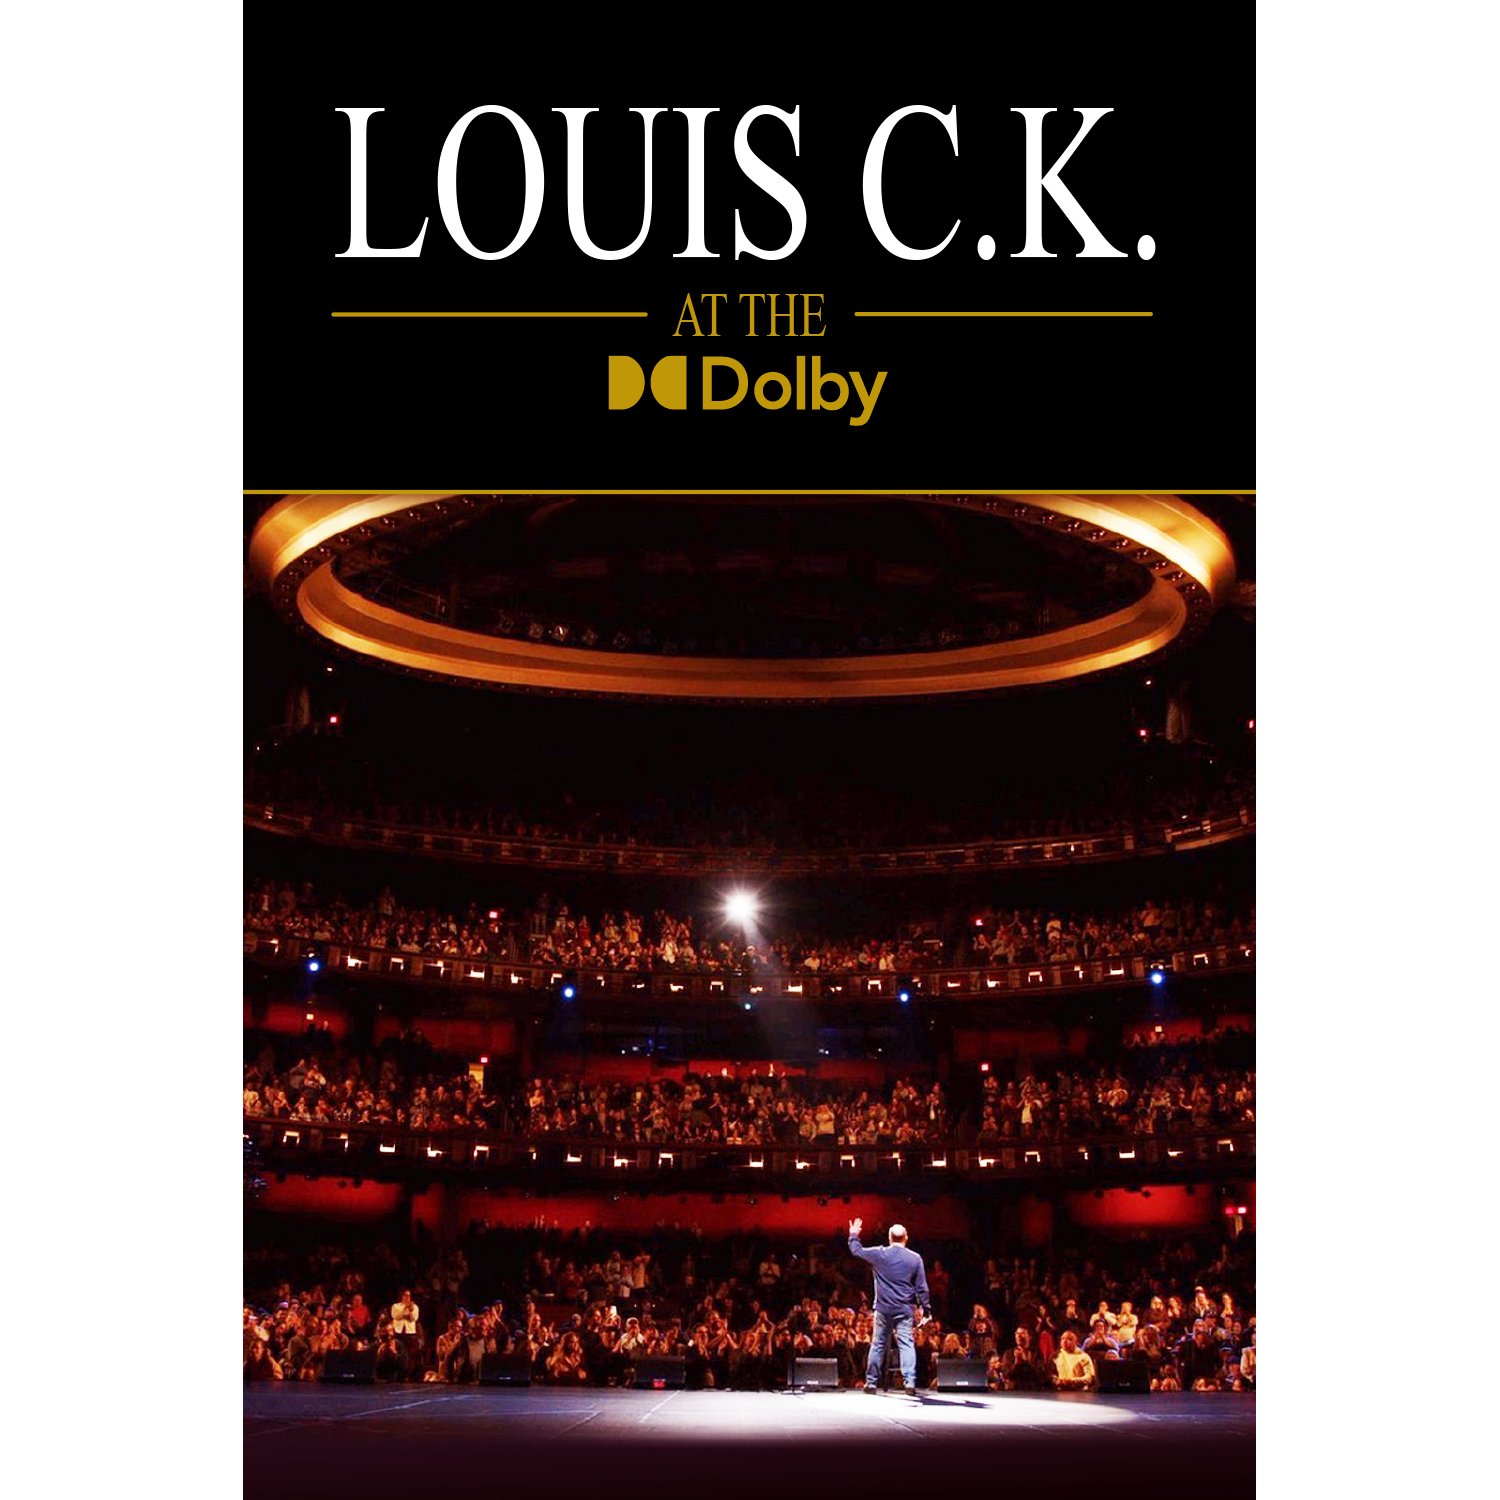 They all have a different Jesus. You can stream and watch my recent  special, Louis C.K. at The Dolby on my website, louisck.com - the…